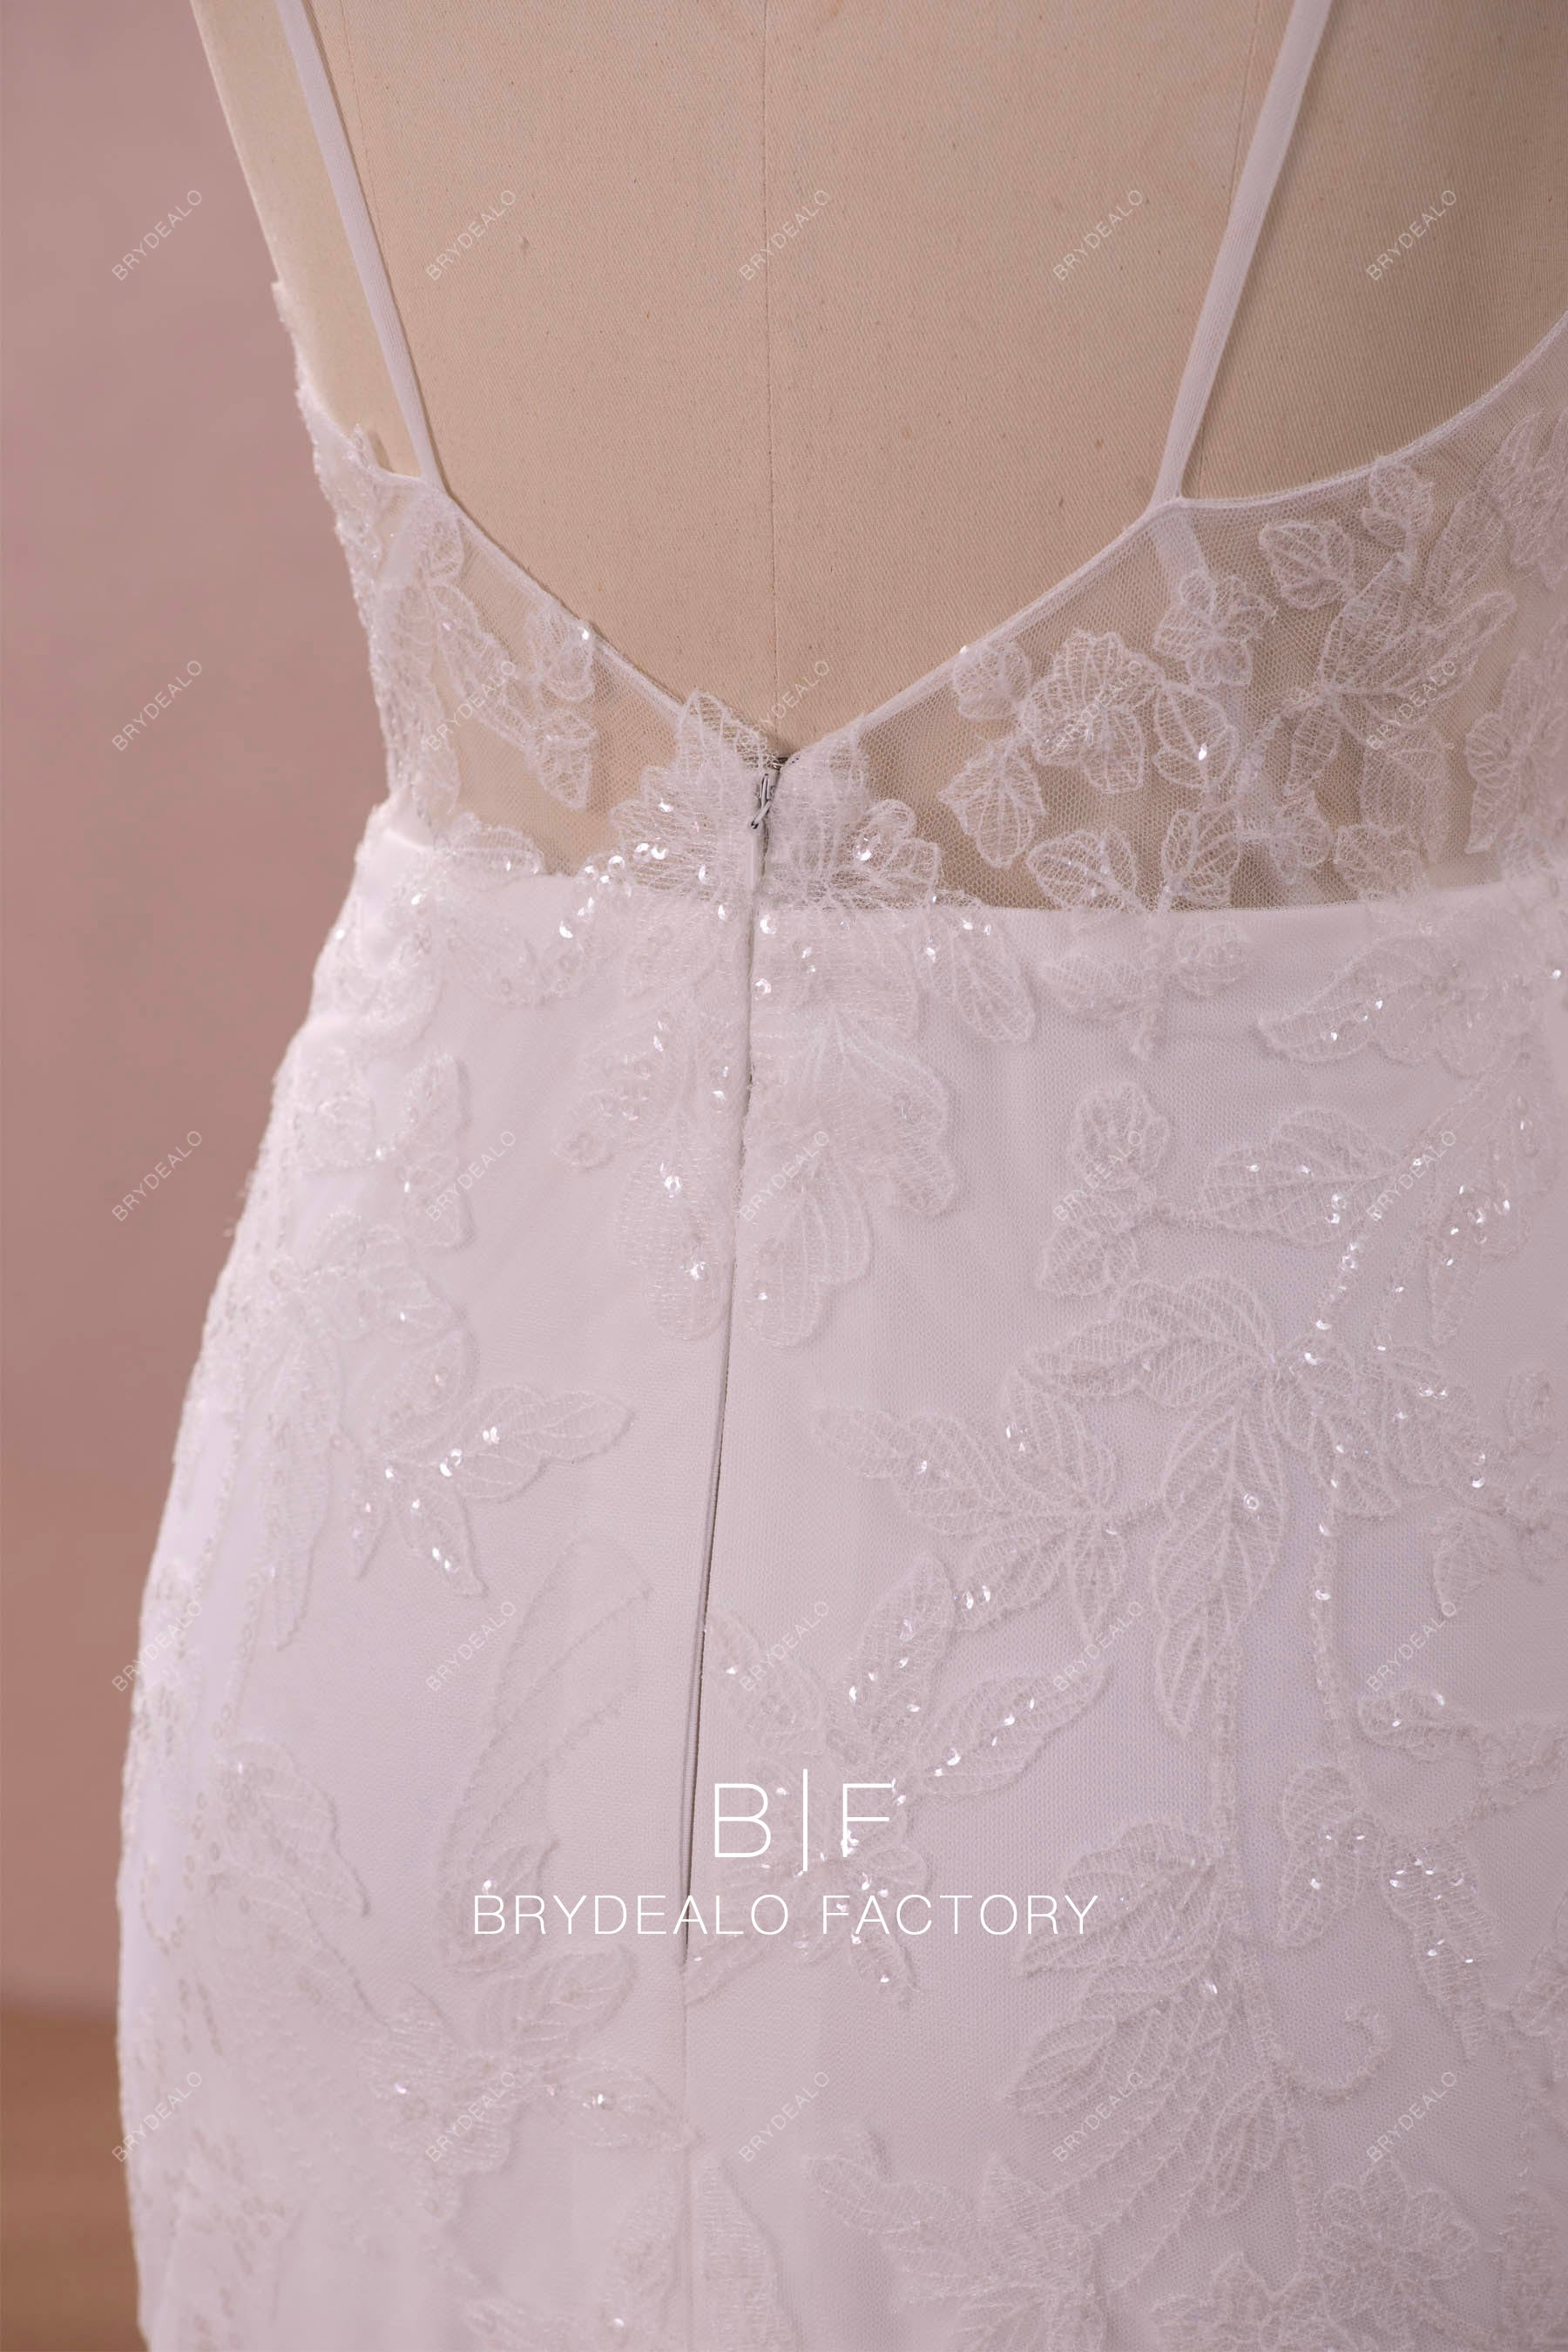 shimmery bridal lace bridal gown